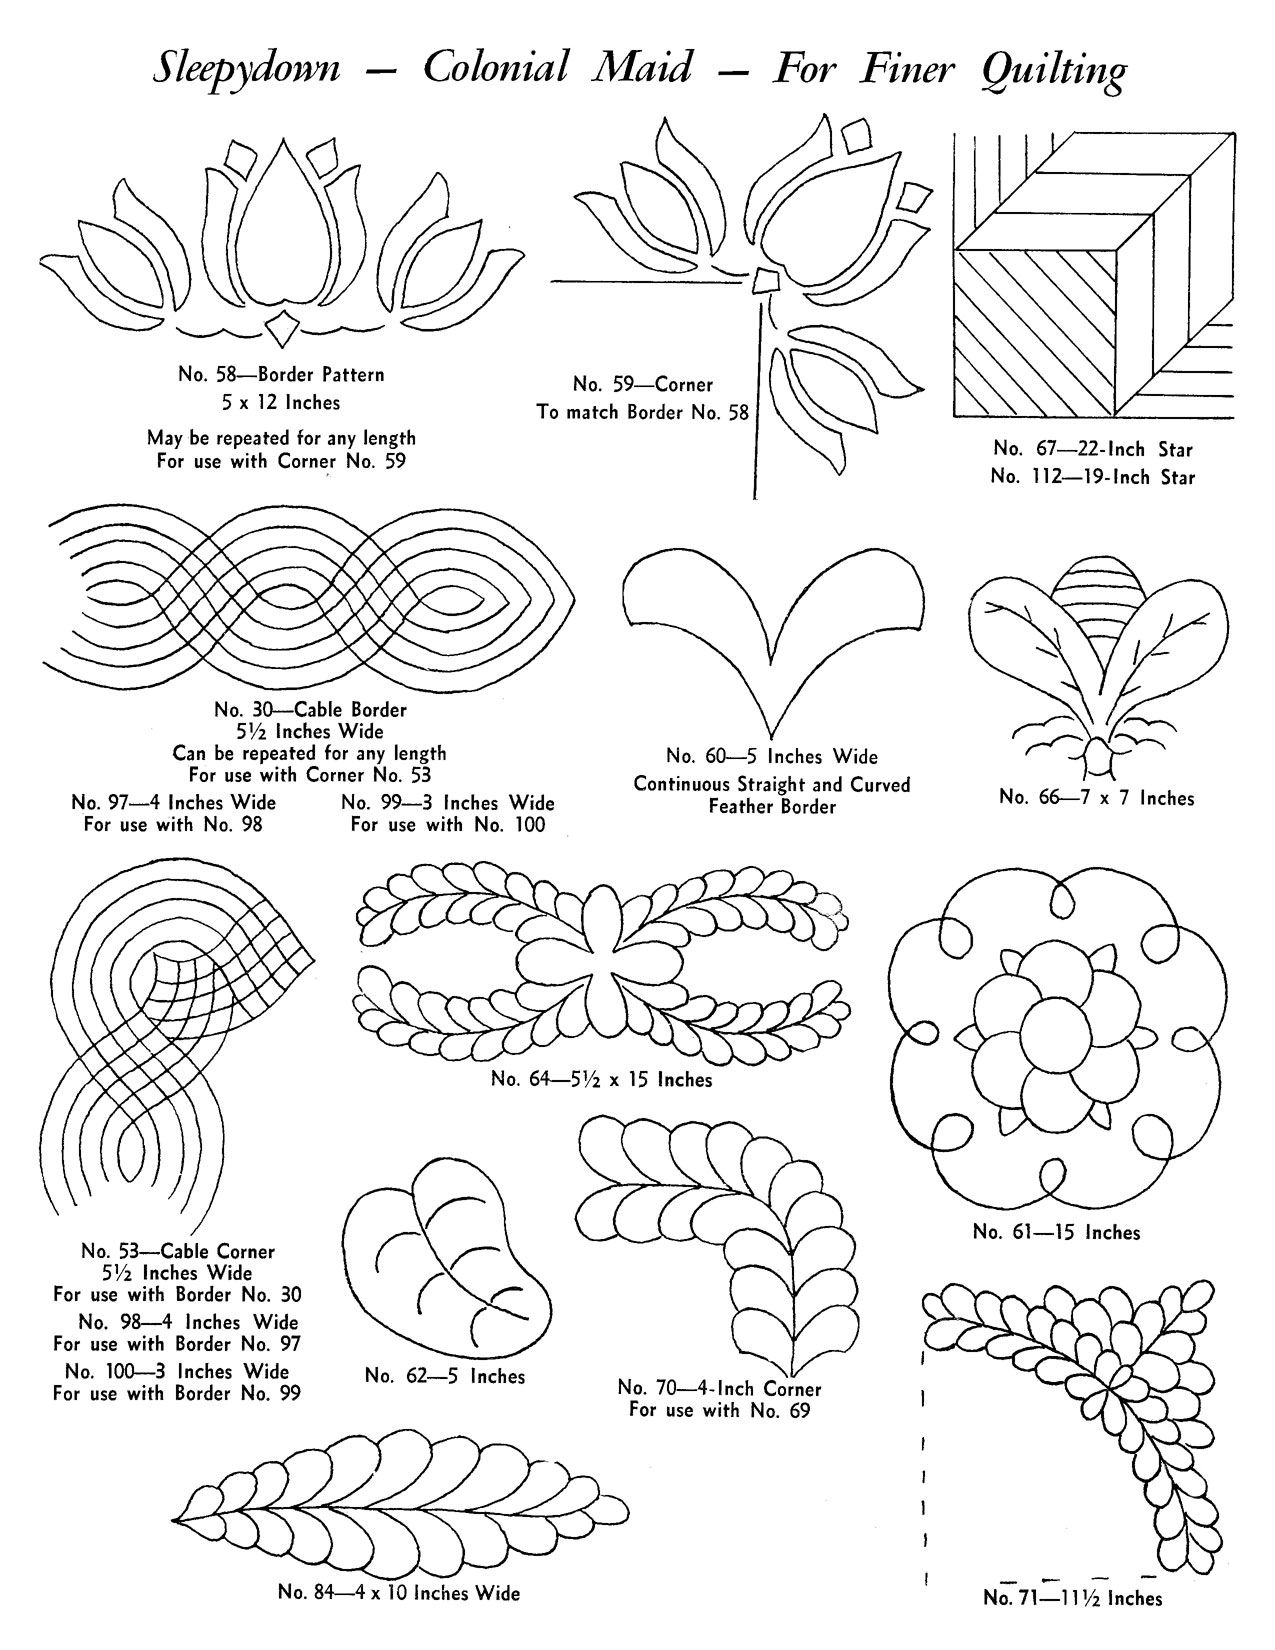 quilting ideas patterns -   Quilting patterns